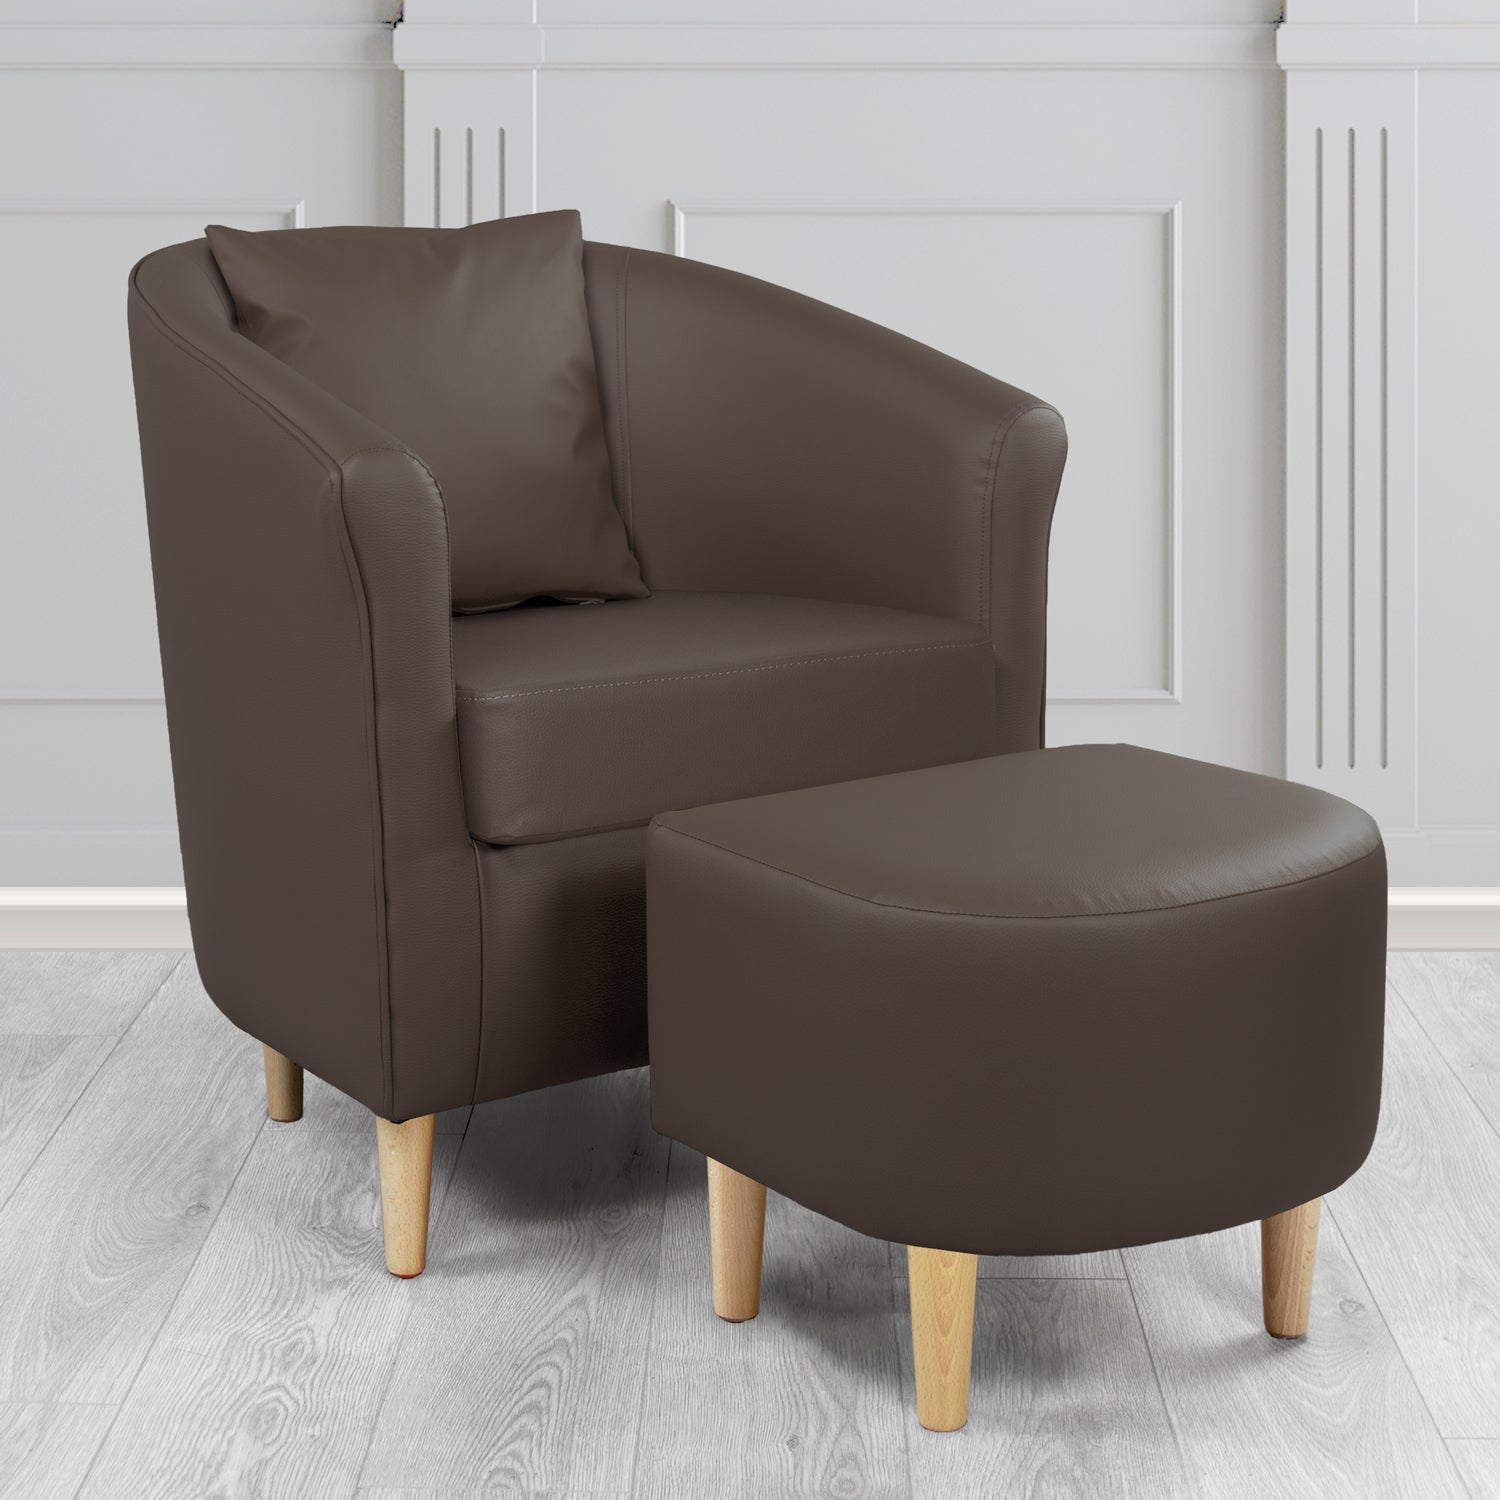 St Tropez Tub Chair with Footstool Set in Madrid Chocolate Faux Leather - The Tub Chair Shop